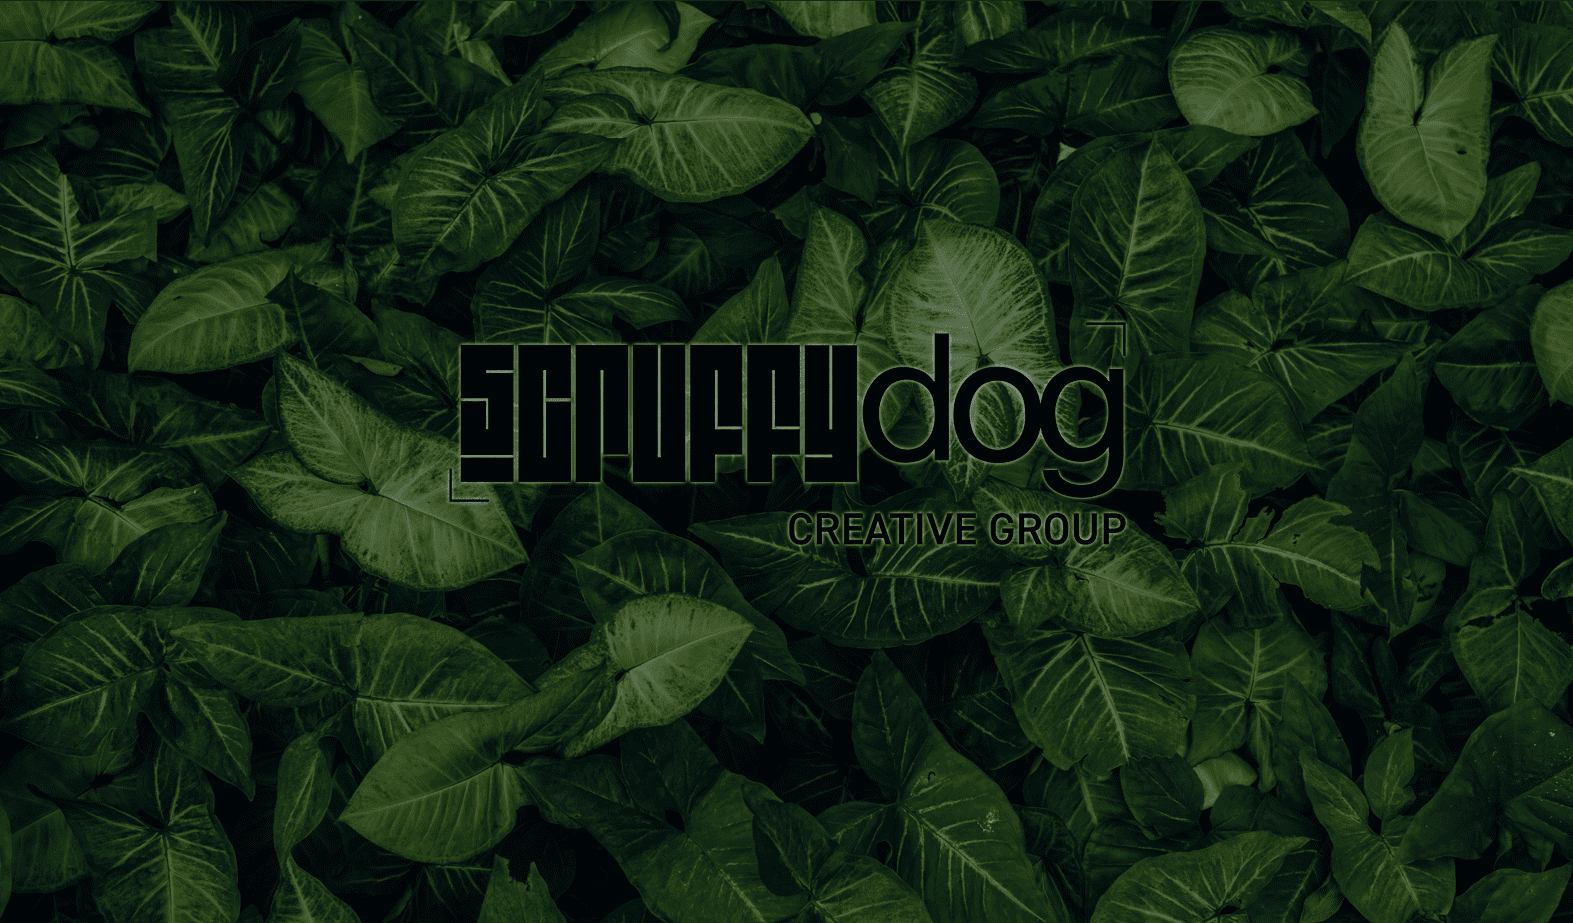 An image of the Scruffy Dog Creative Group logo with leafy background